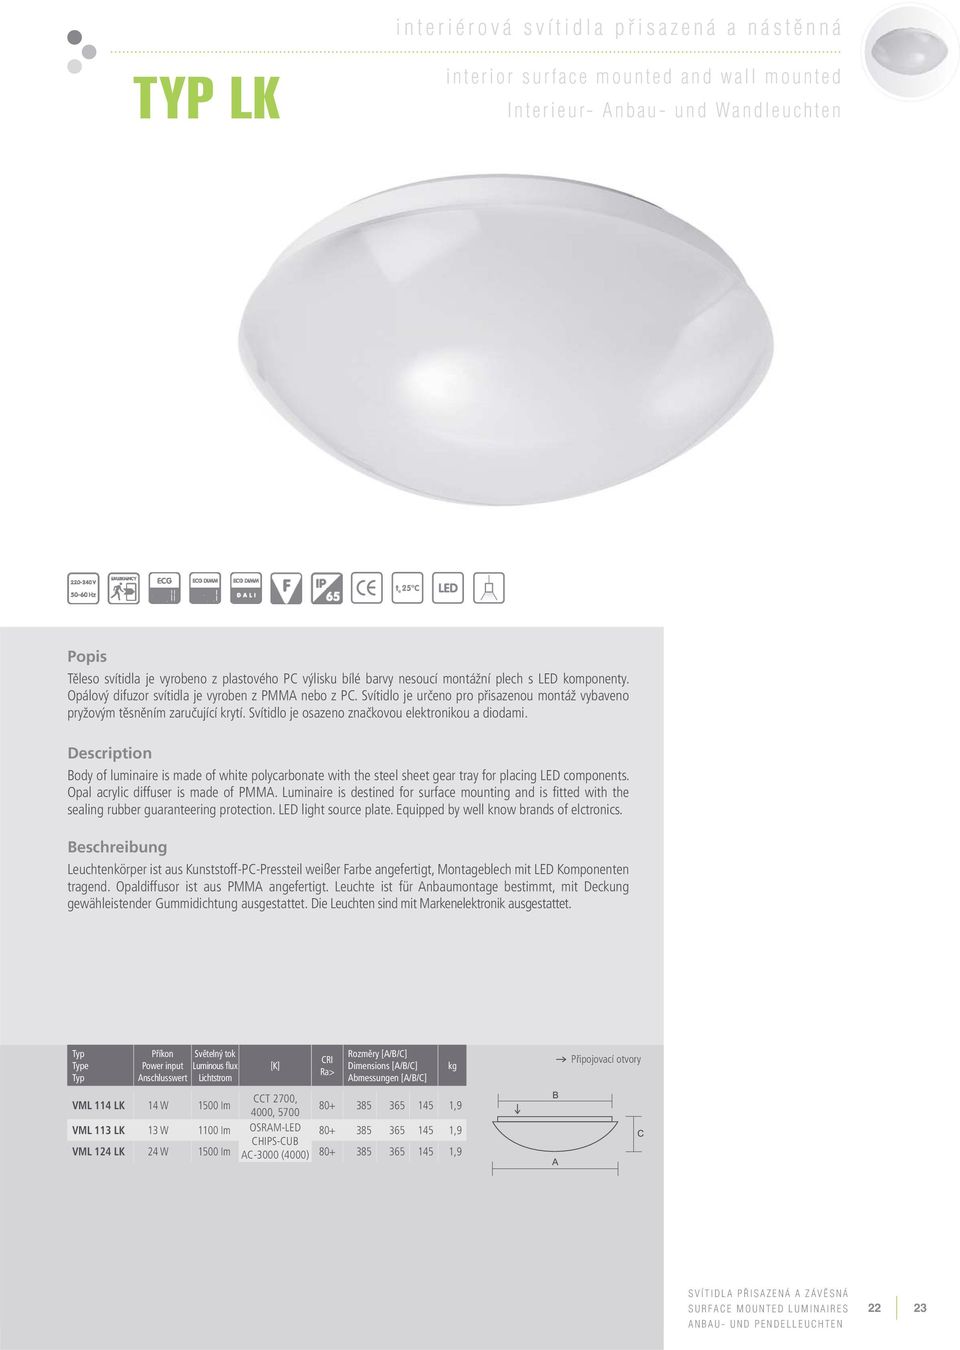 Svítidlo je osazeno značkovou elektronikou a diodami. Body of luminaire is made of white polycarbonate with the steel sheet gear tray for placing LED components. Opal acrylic diffuser is made of PMMA.